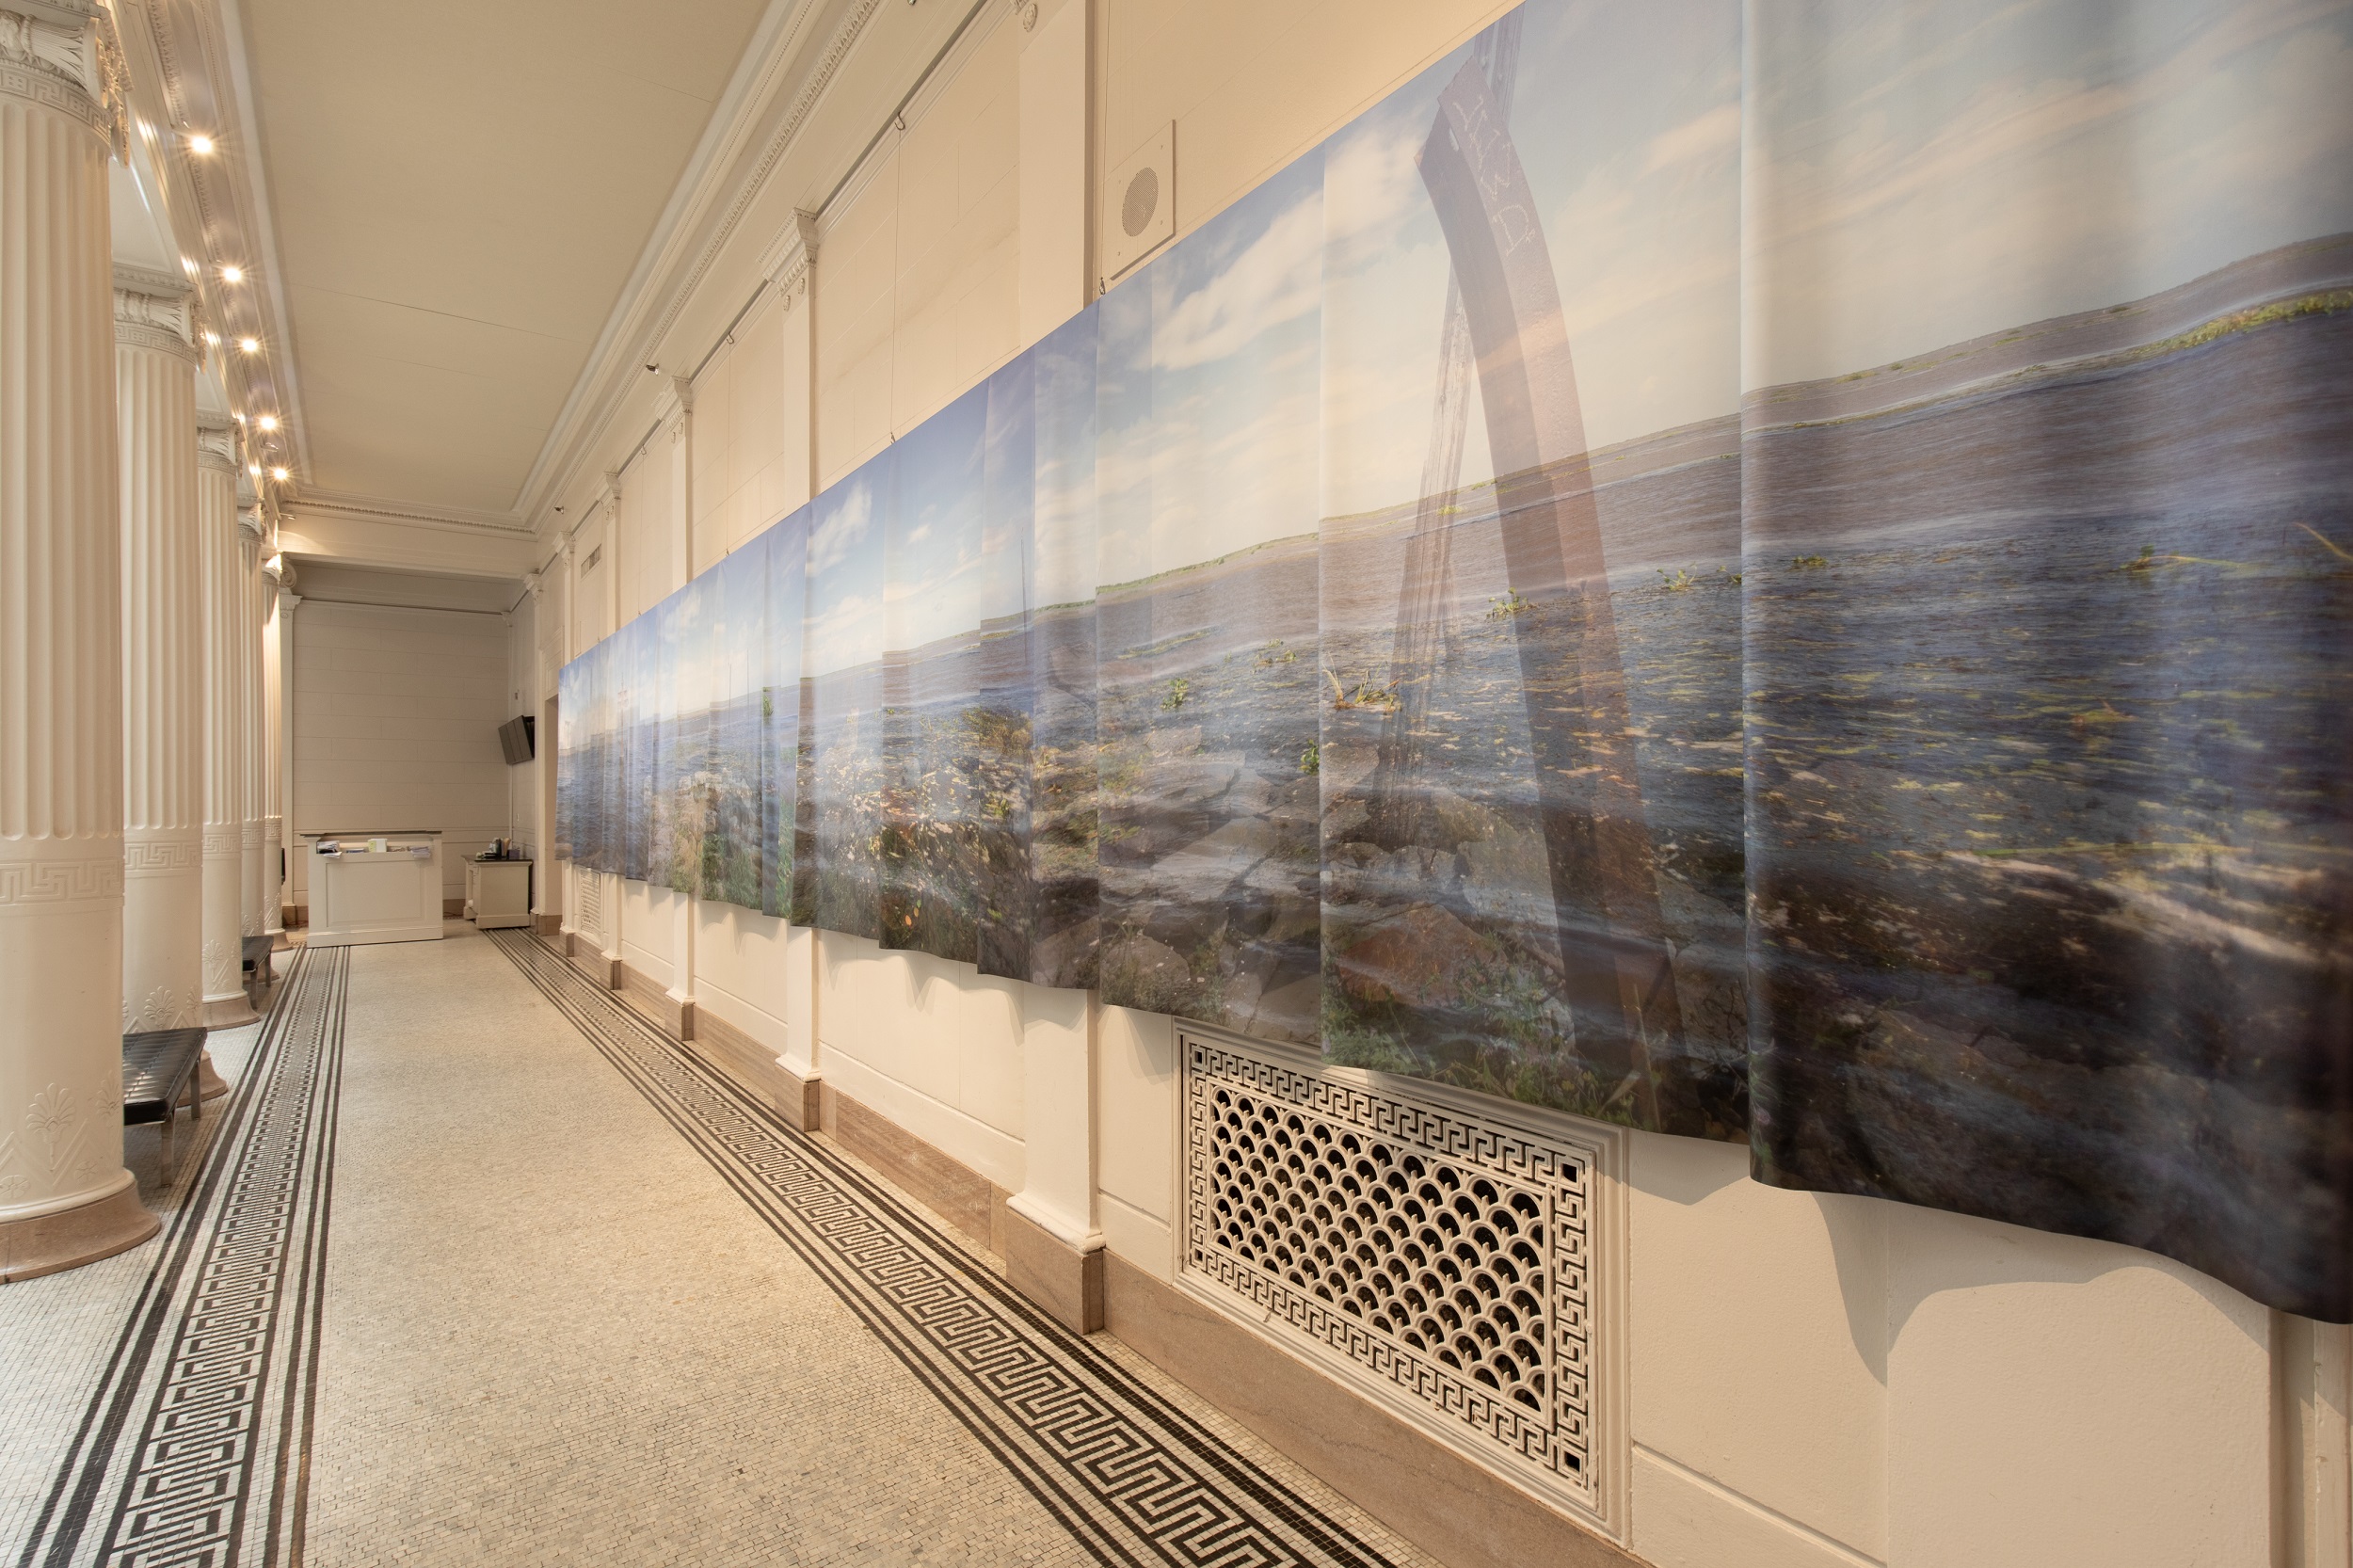 A fabric painting of an industrial waterscape hung in the interior hallway of a white, neoclassical building